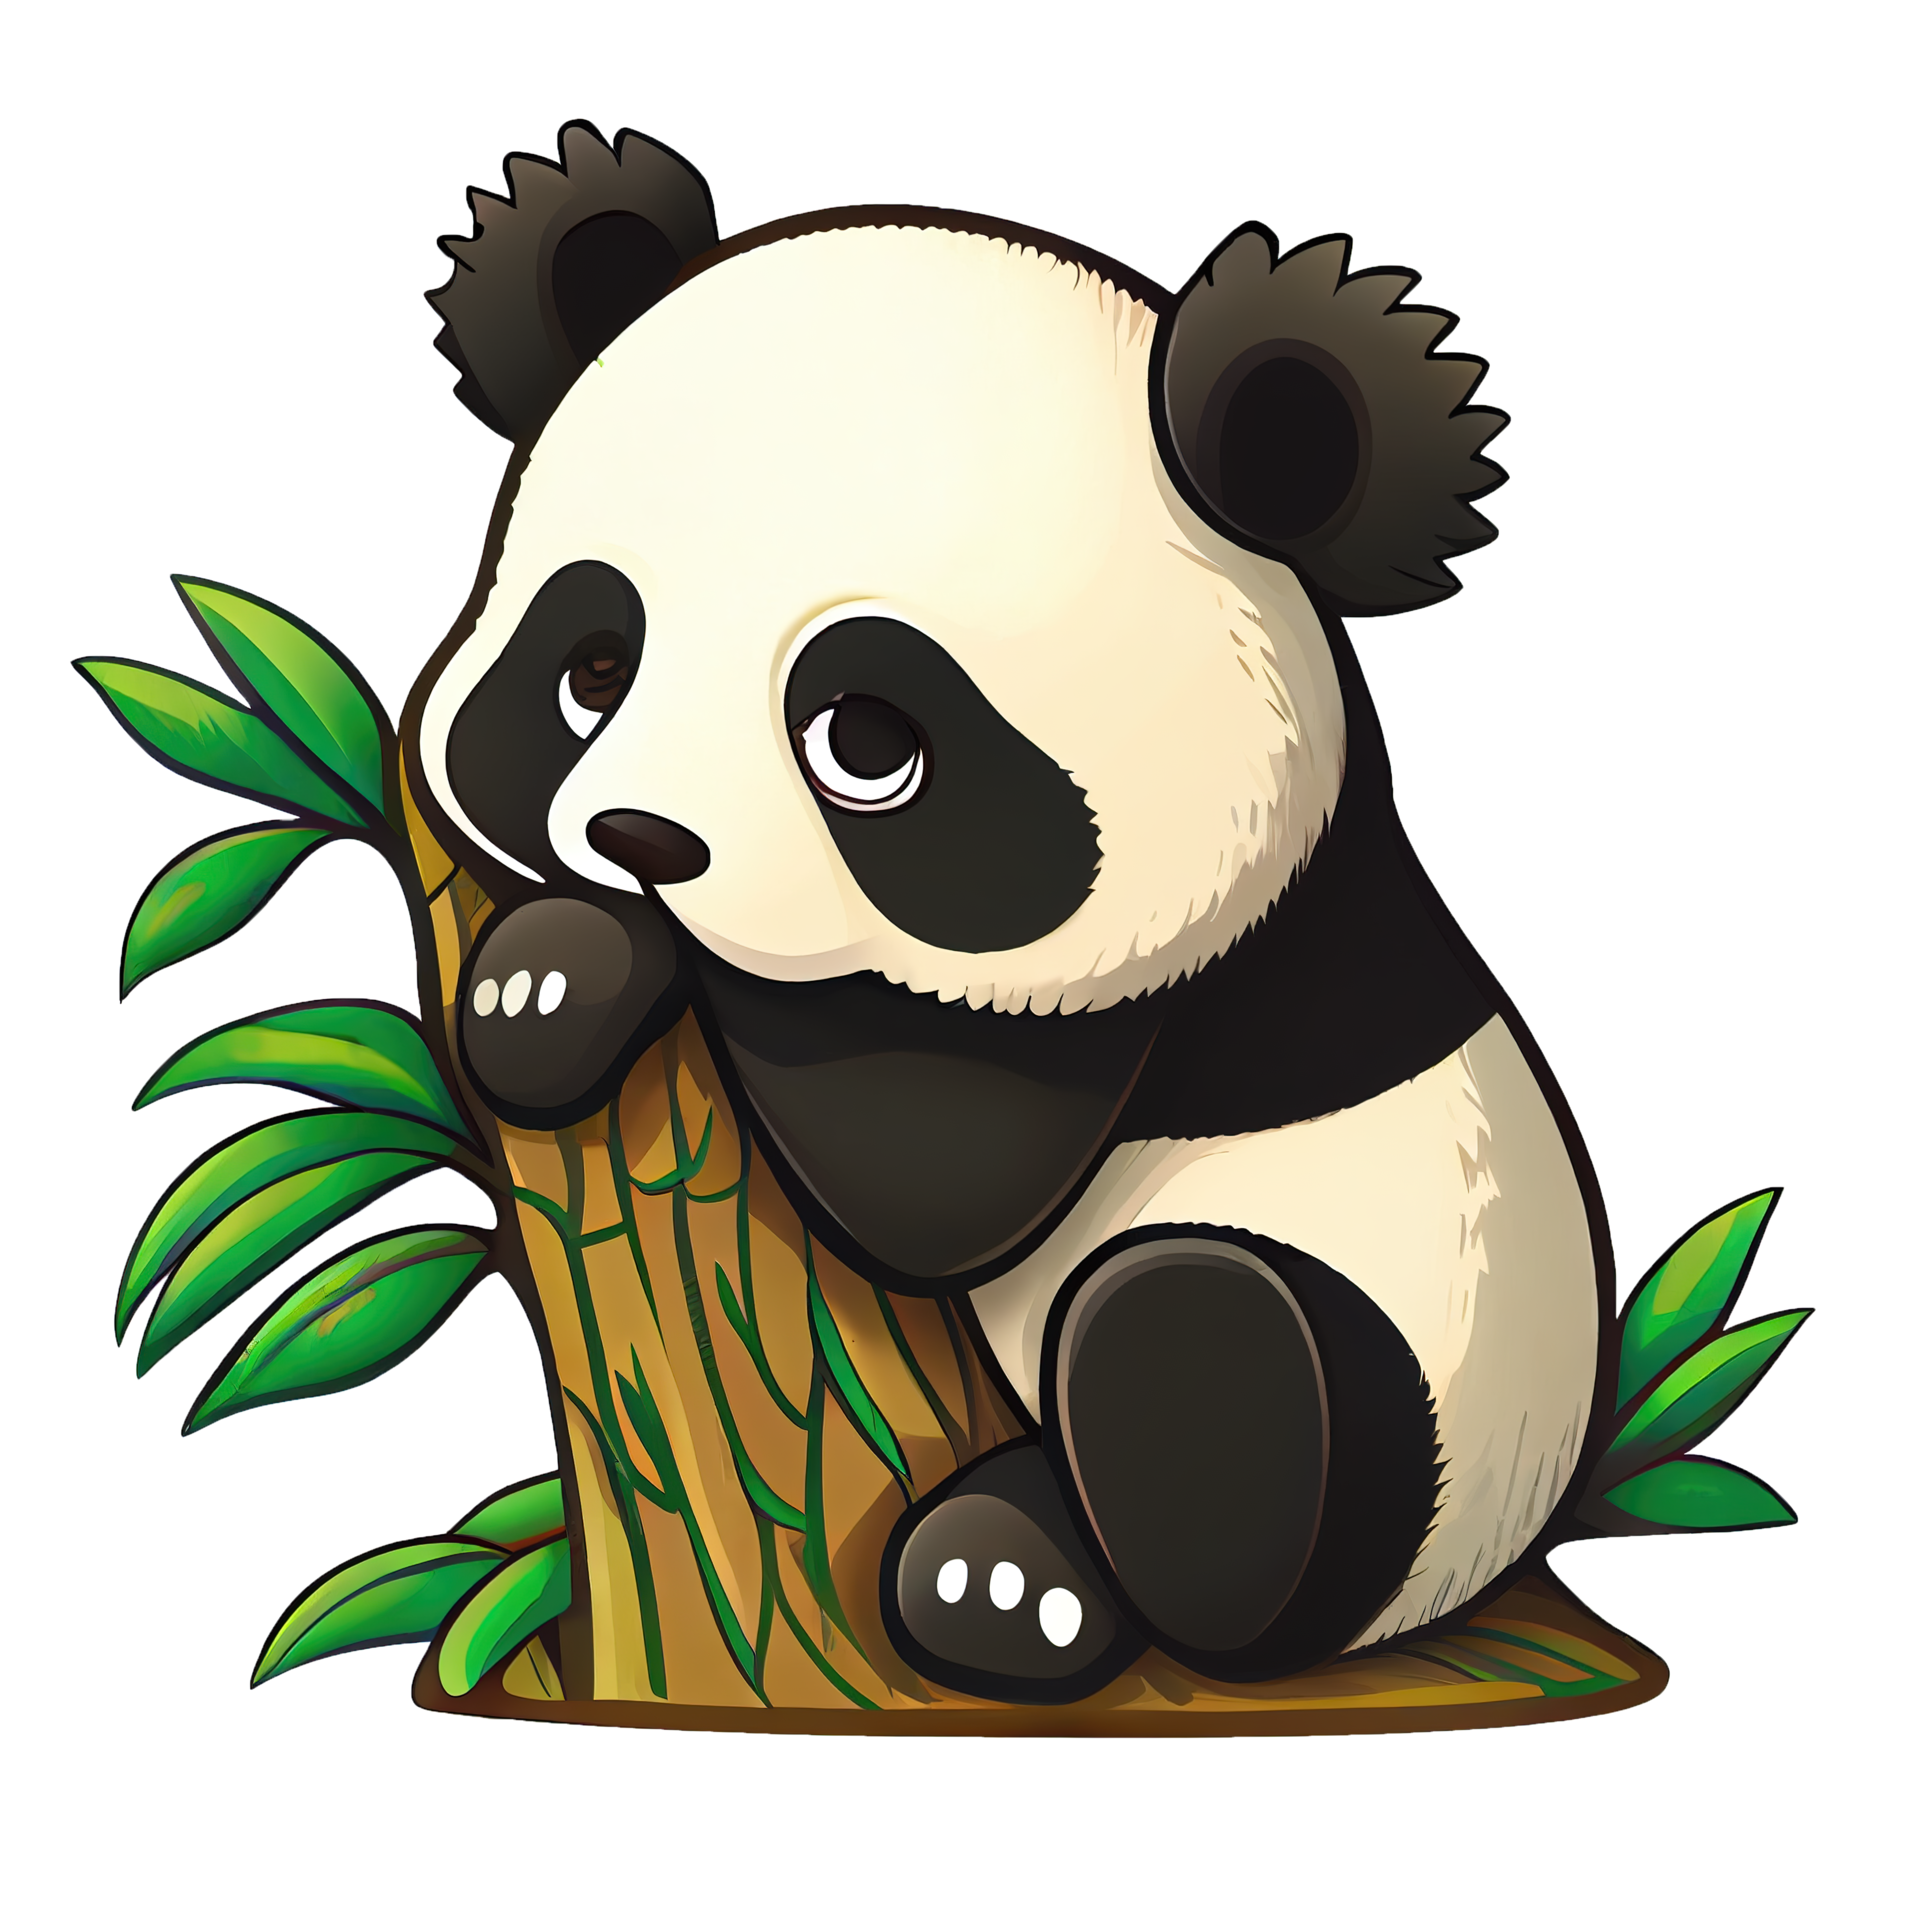 Free Cute and cuddly Panda cartoon sticker, perfect for decorating  notebooks, laptops, and water bottles 17293746 PNG with Transparent  Background